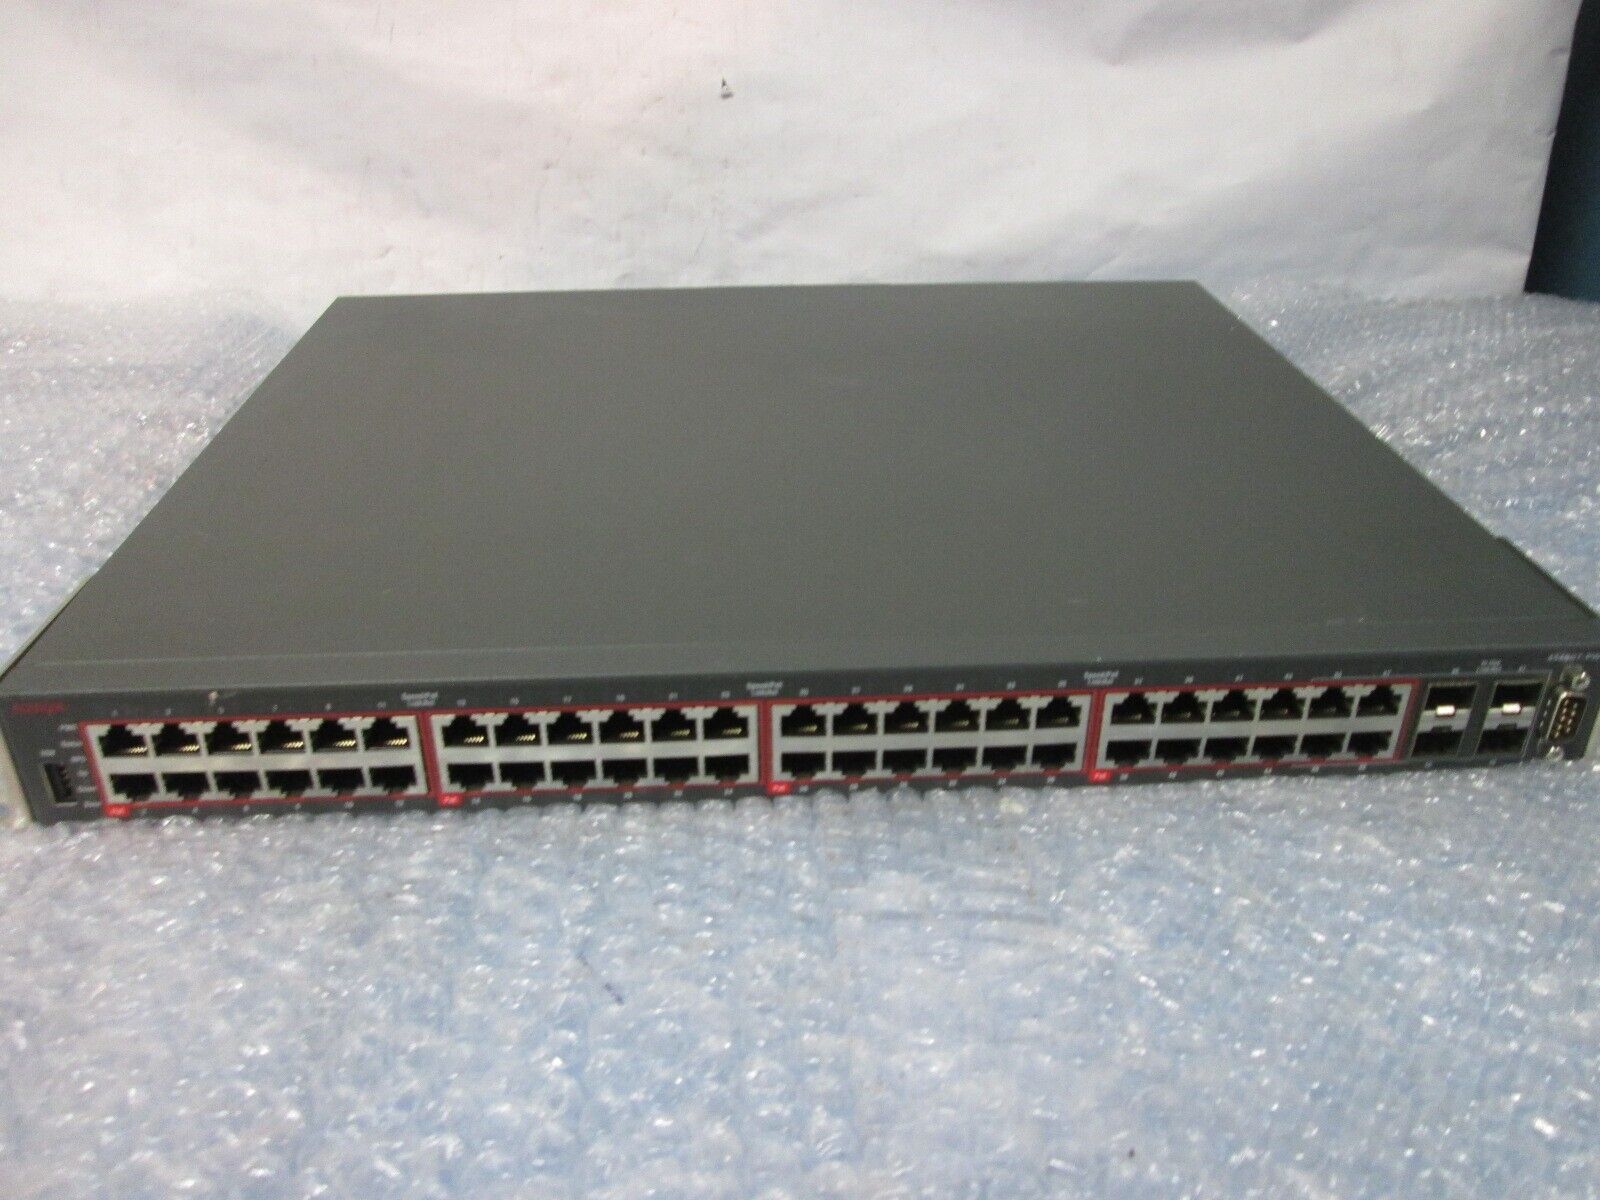 AVAYA 4548GT-PWR 48-Port POE Ethernet Routing Switch